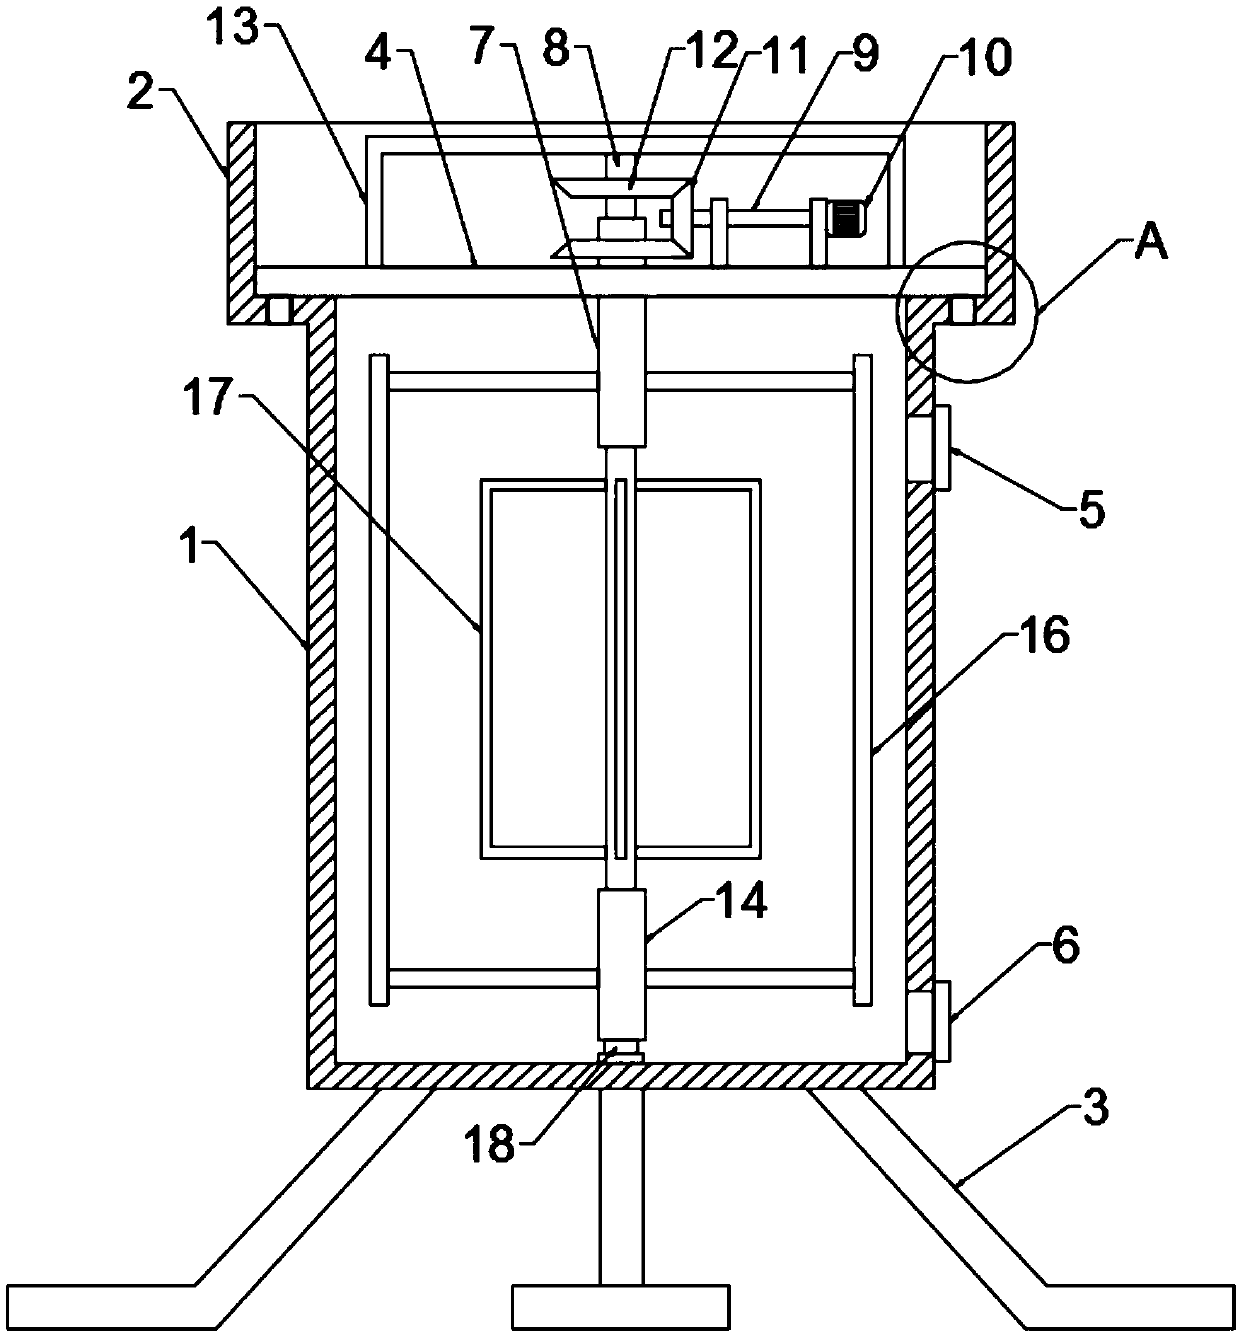 Mutual-impacting-type chemical raw material stirring and mixing device